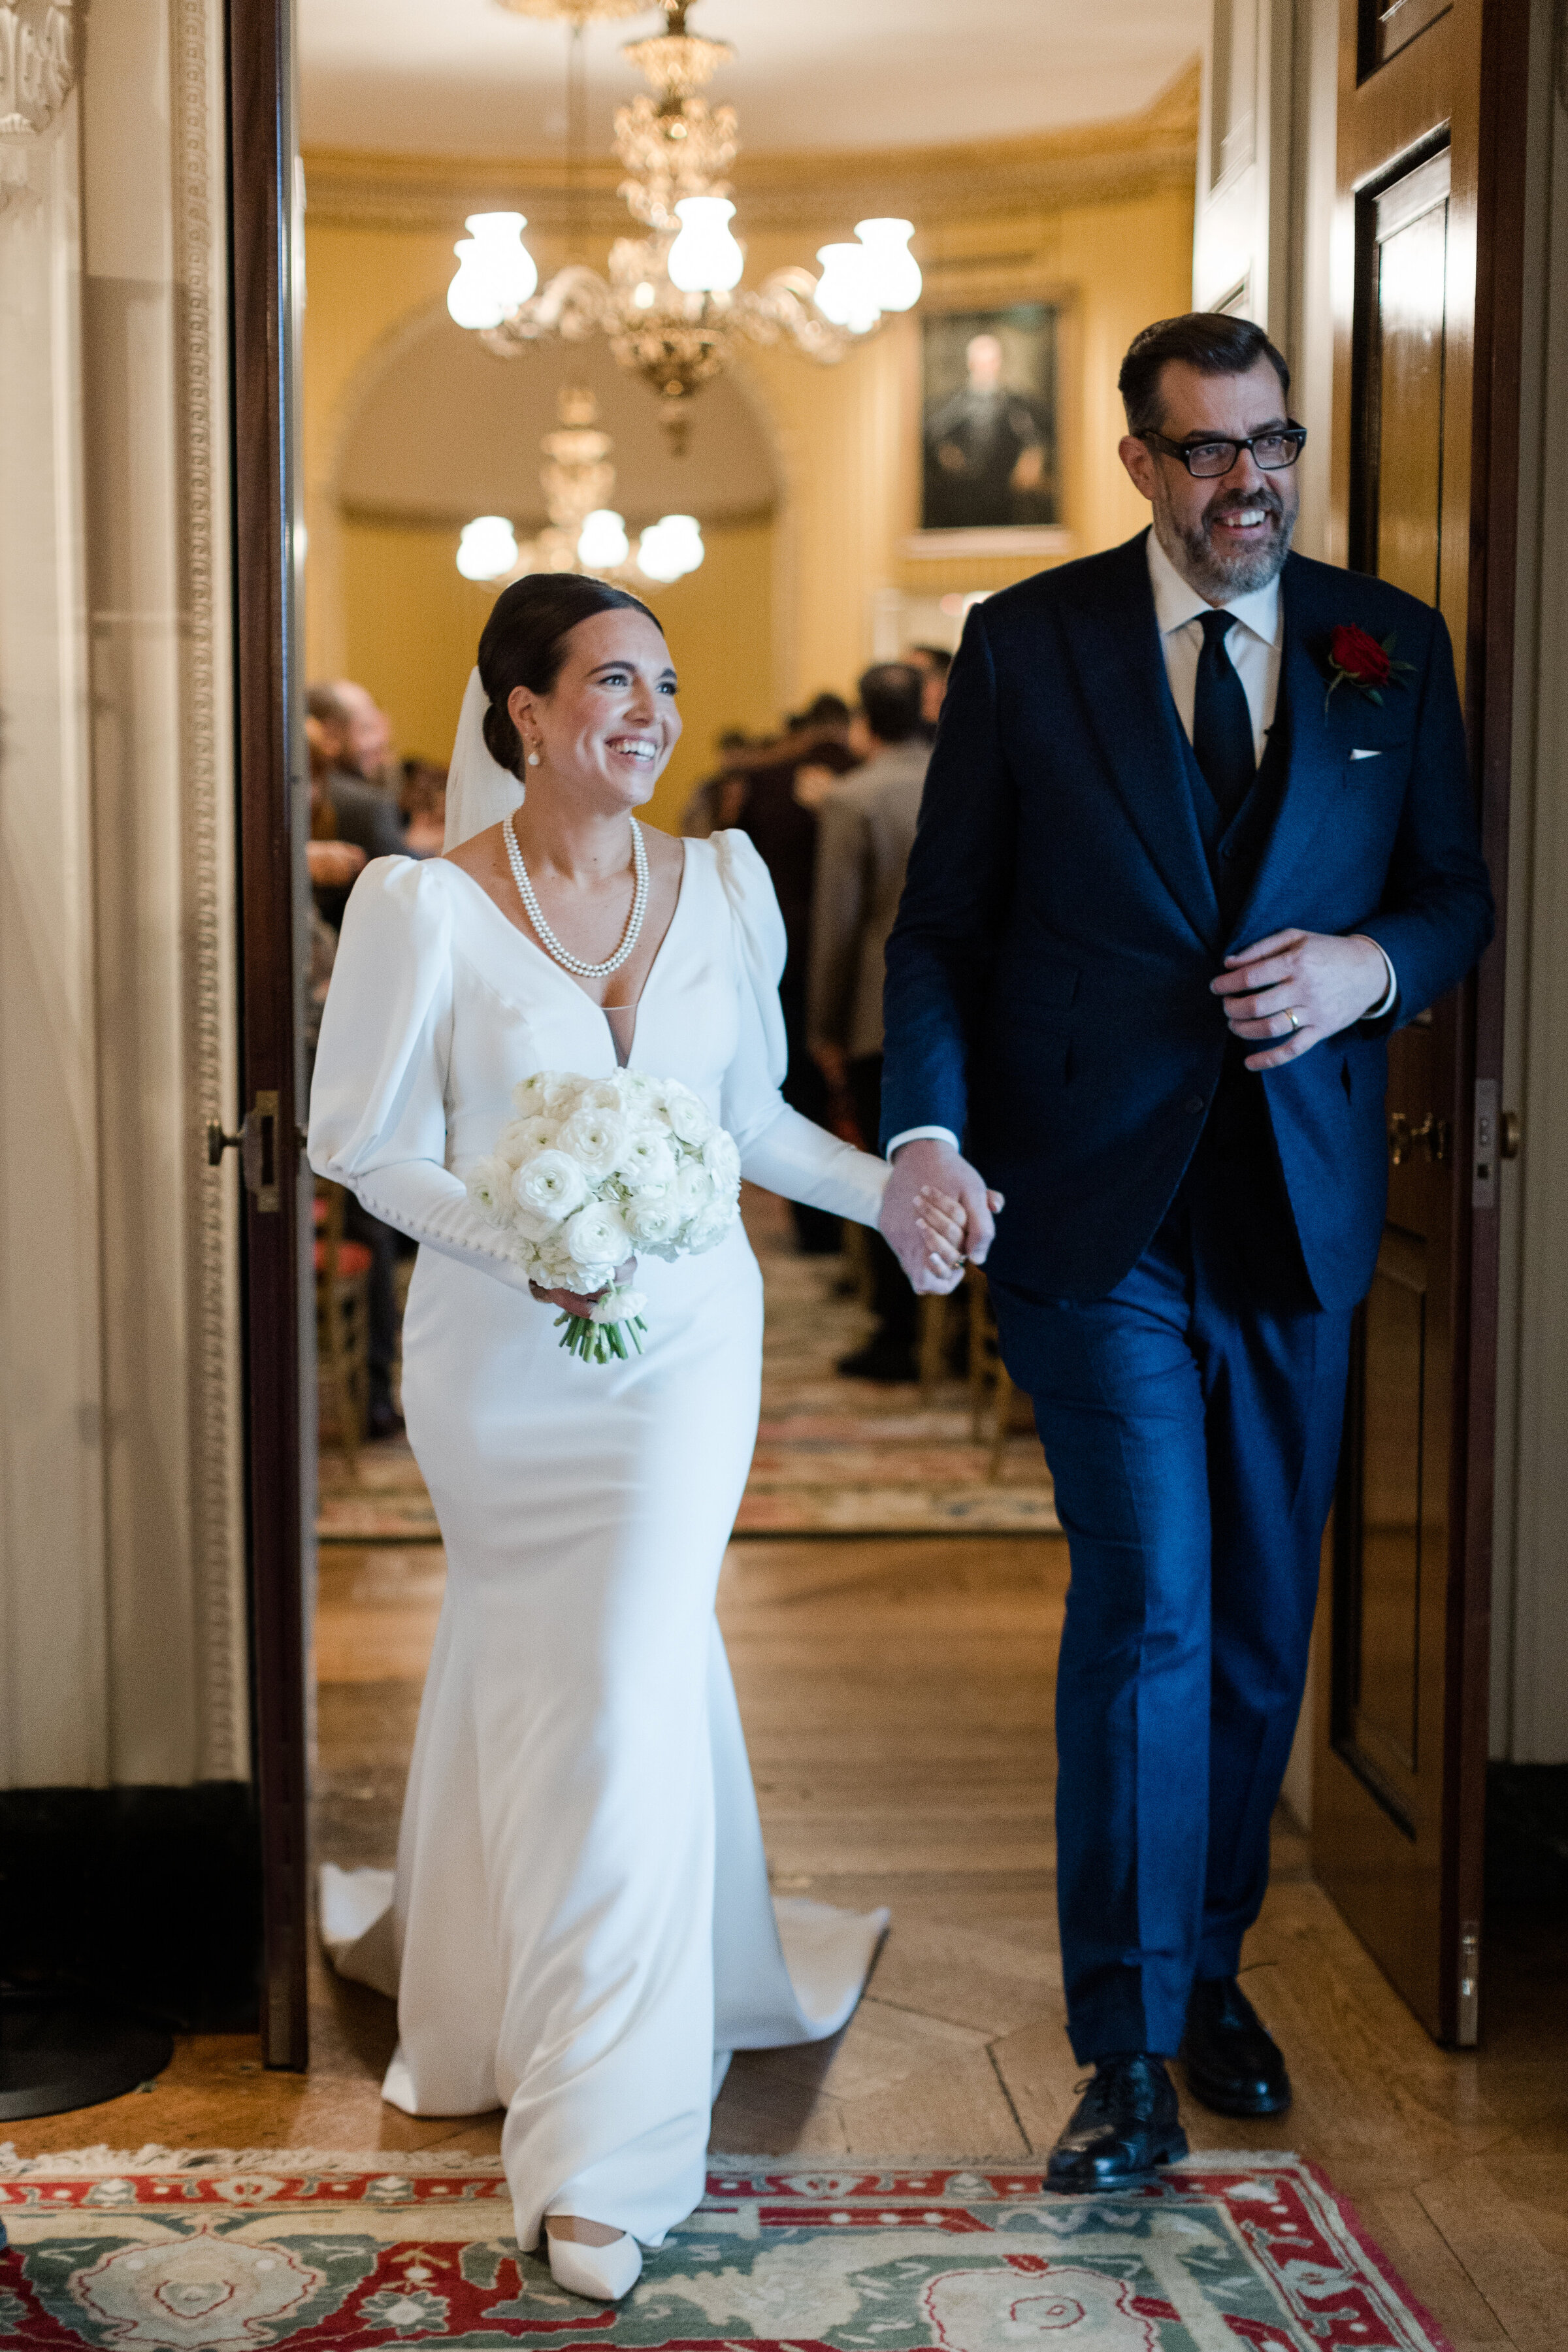 Pointless Tv Presenter Richard Osman and Doctor Who and The Hustle actress Ingrid Oliver in classic Pronovias gown exit the aisle on their wedding day at Goodwood House